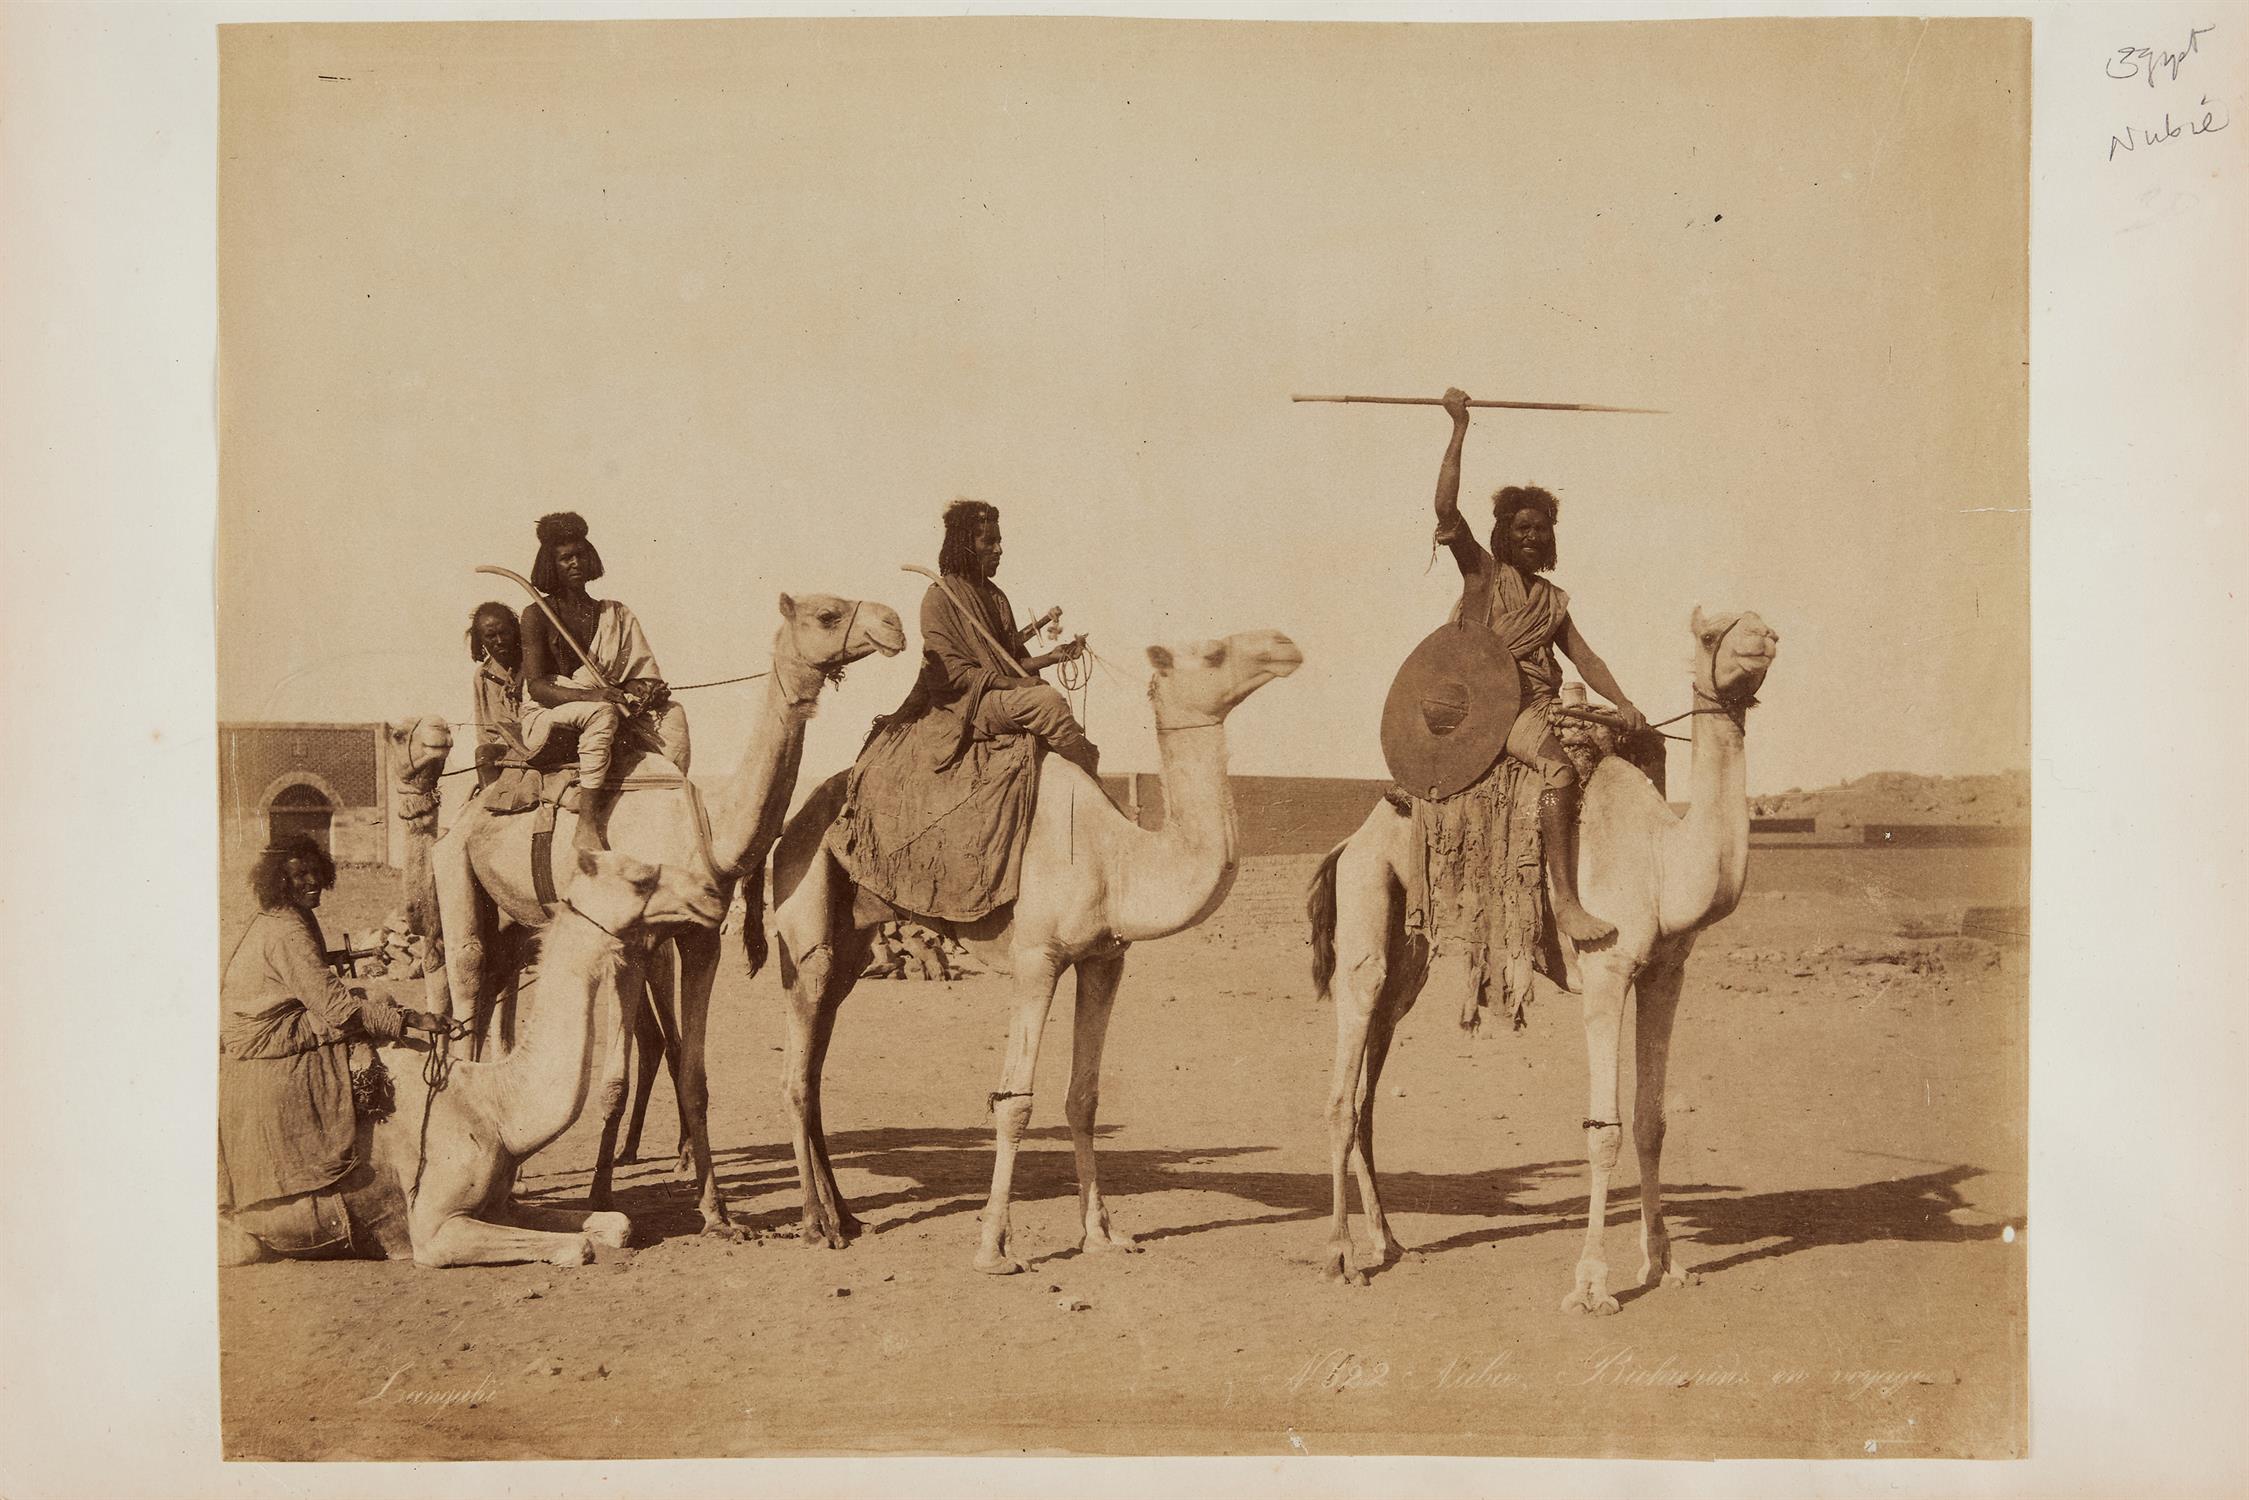 Ɵ Egypt, Damascus and the Holy Lands, by Arnoux, Bonfils and Zangaki [various, c. 1880-1900] - Image 8 of 8